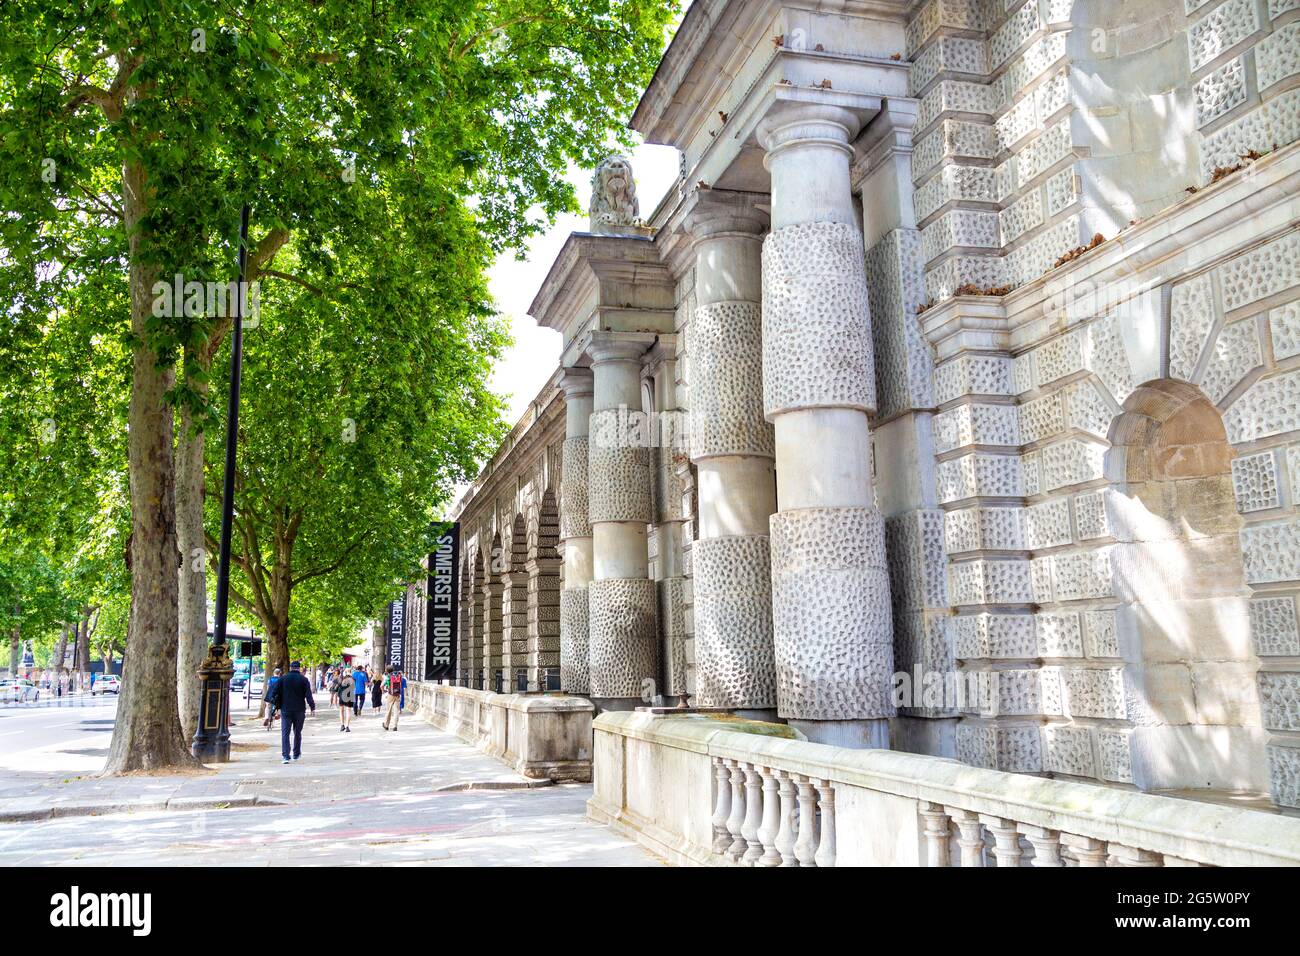 Exterior of the neoclassical Somerset House, Victoria Embankment side, London, UK Stock Photo